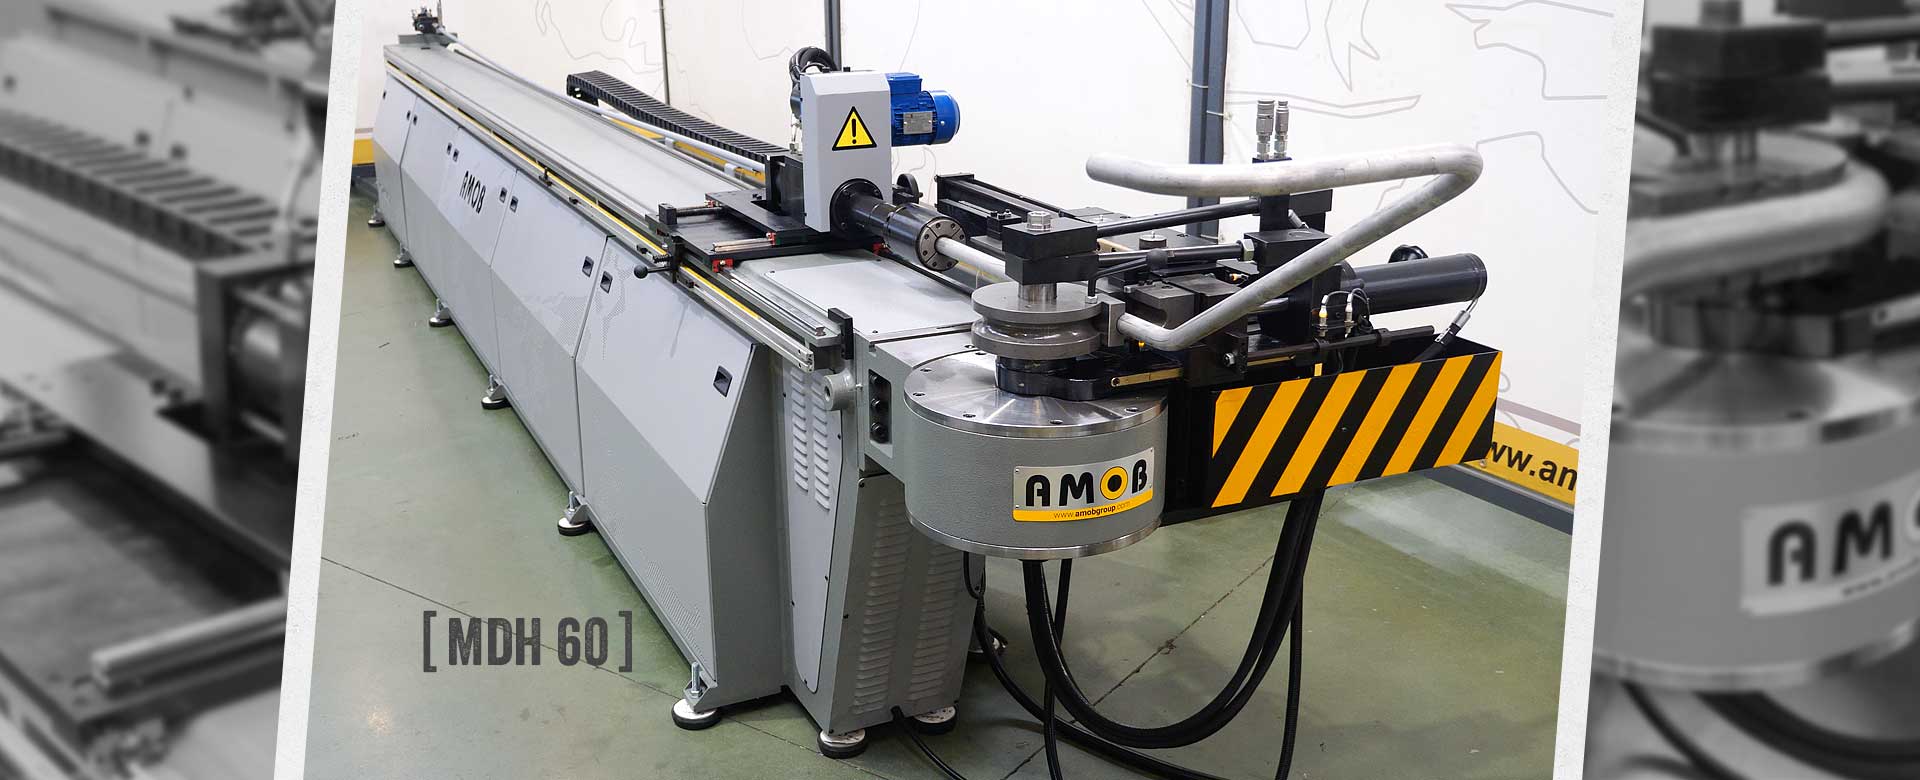 GSS Machinery offers the AMOB MDH 60 series tube bender in multiple configurations.